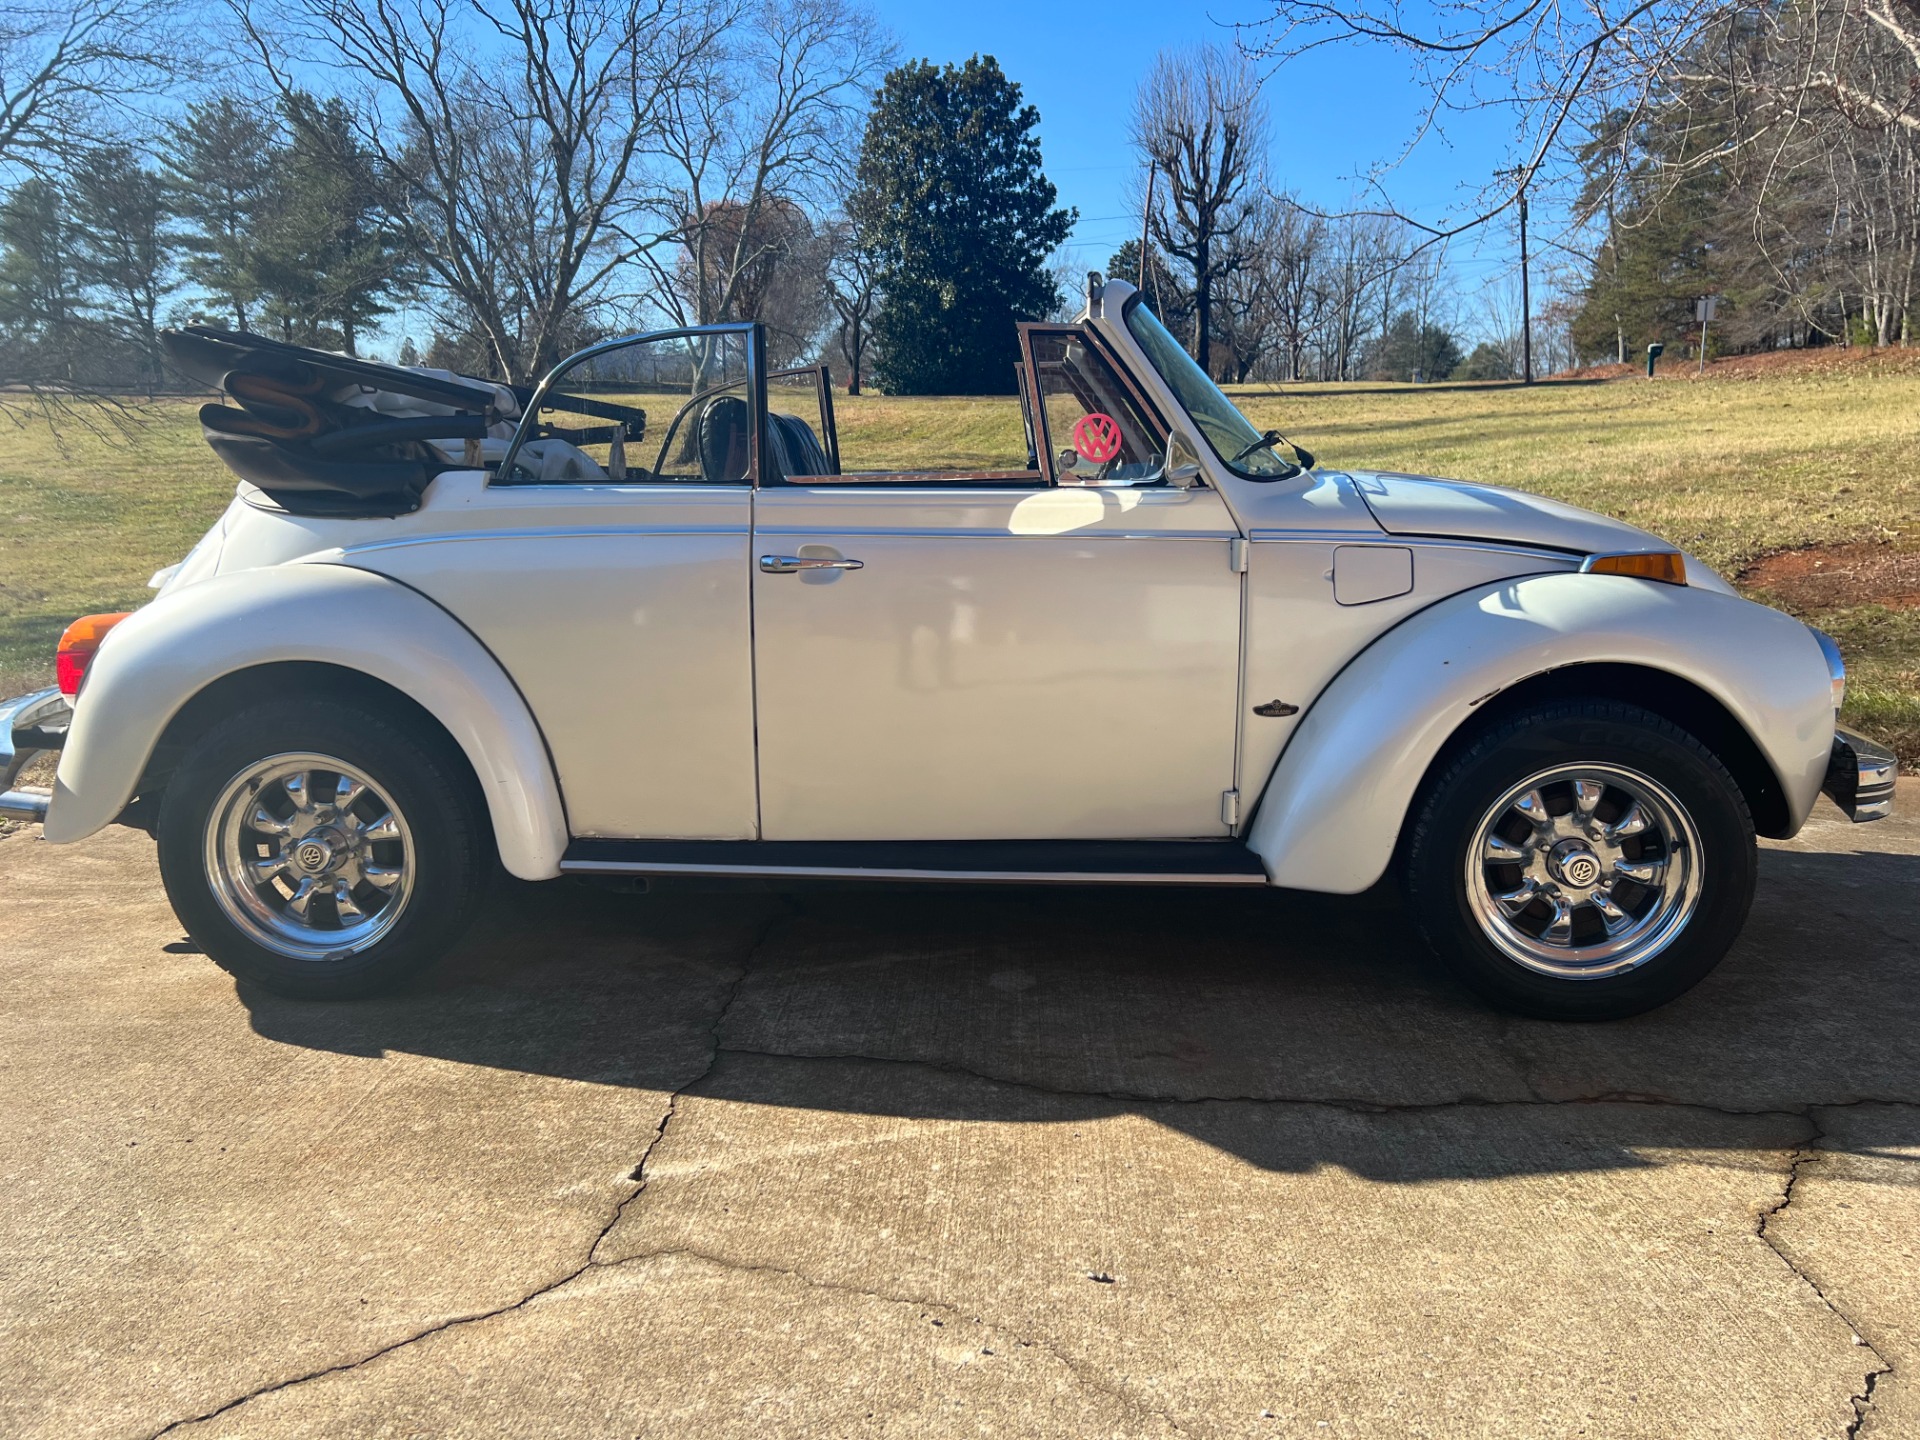 Used 1975 Volkswagen Karmann Beetle Convertible  261 , For Sale $19500, Call Us: (704) 996-3735